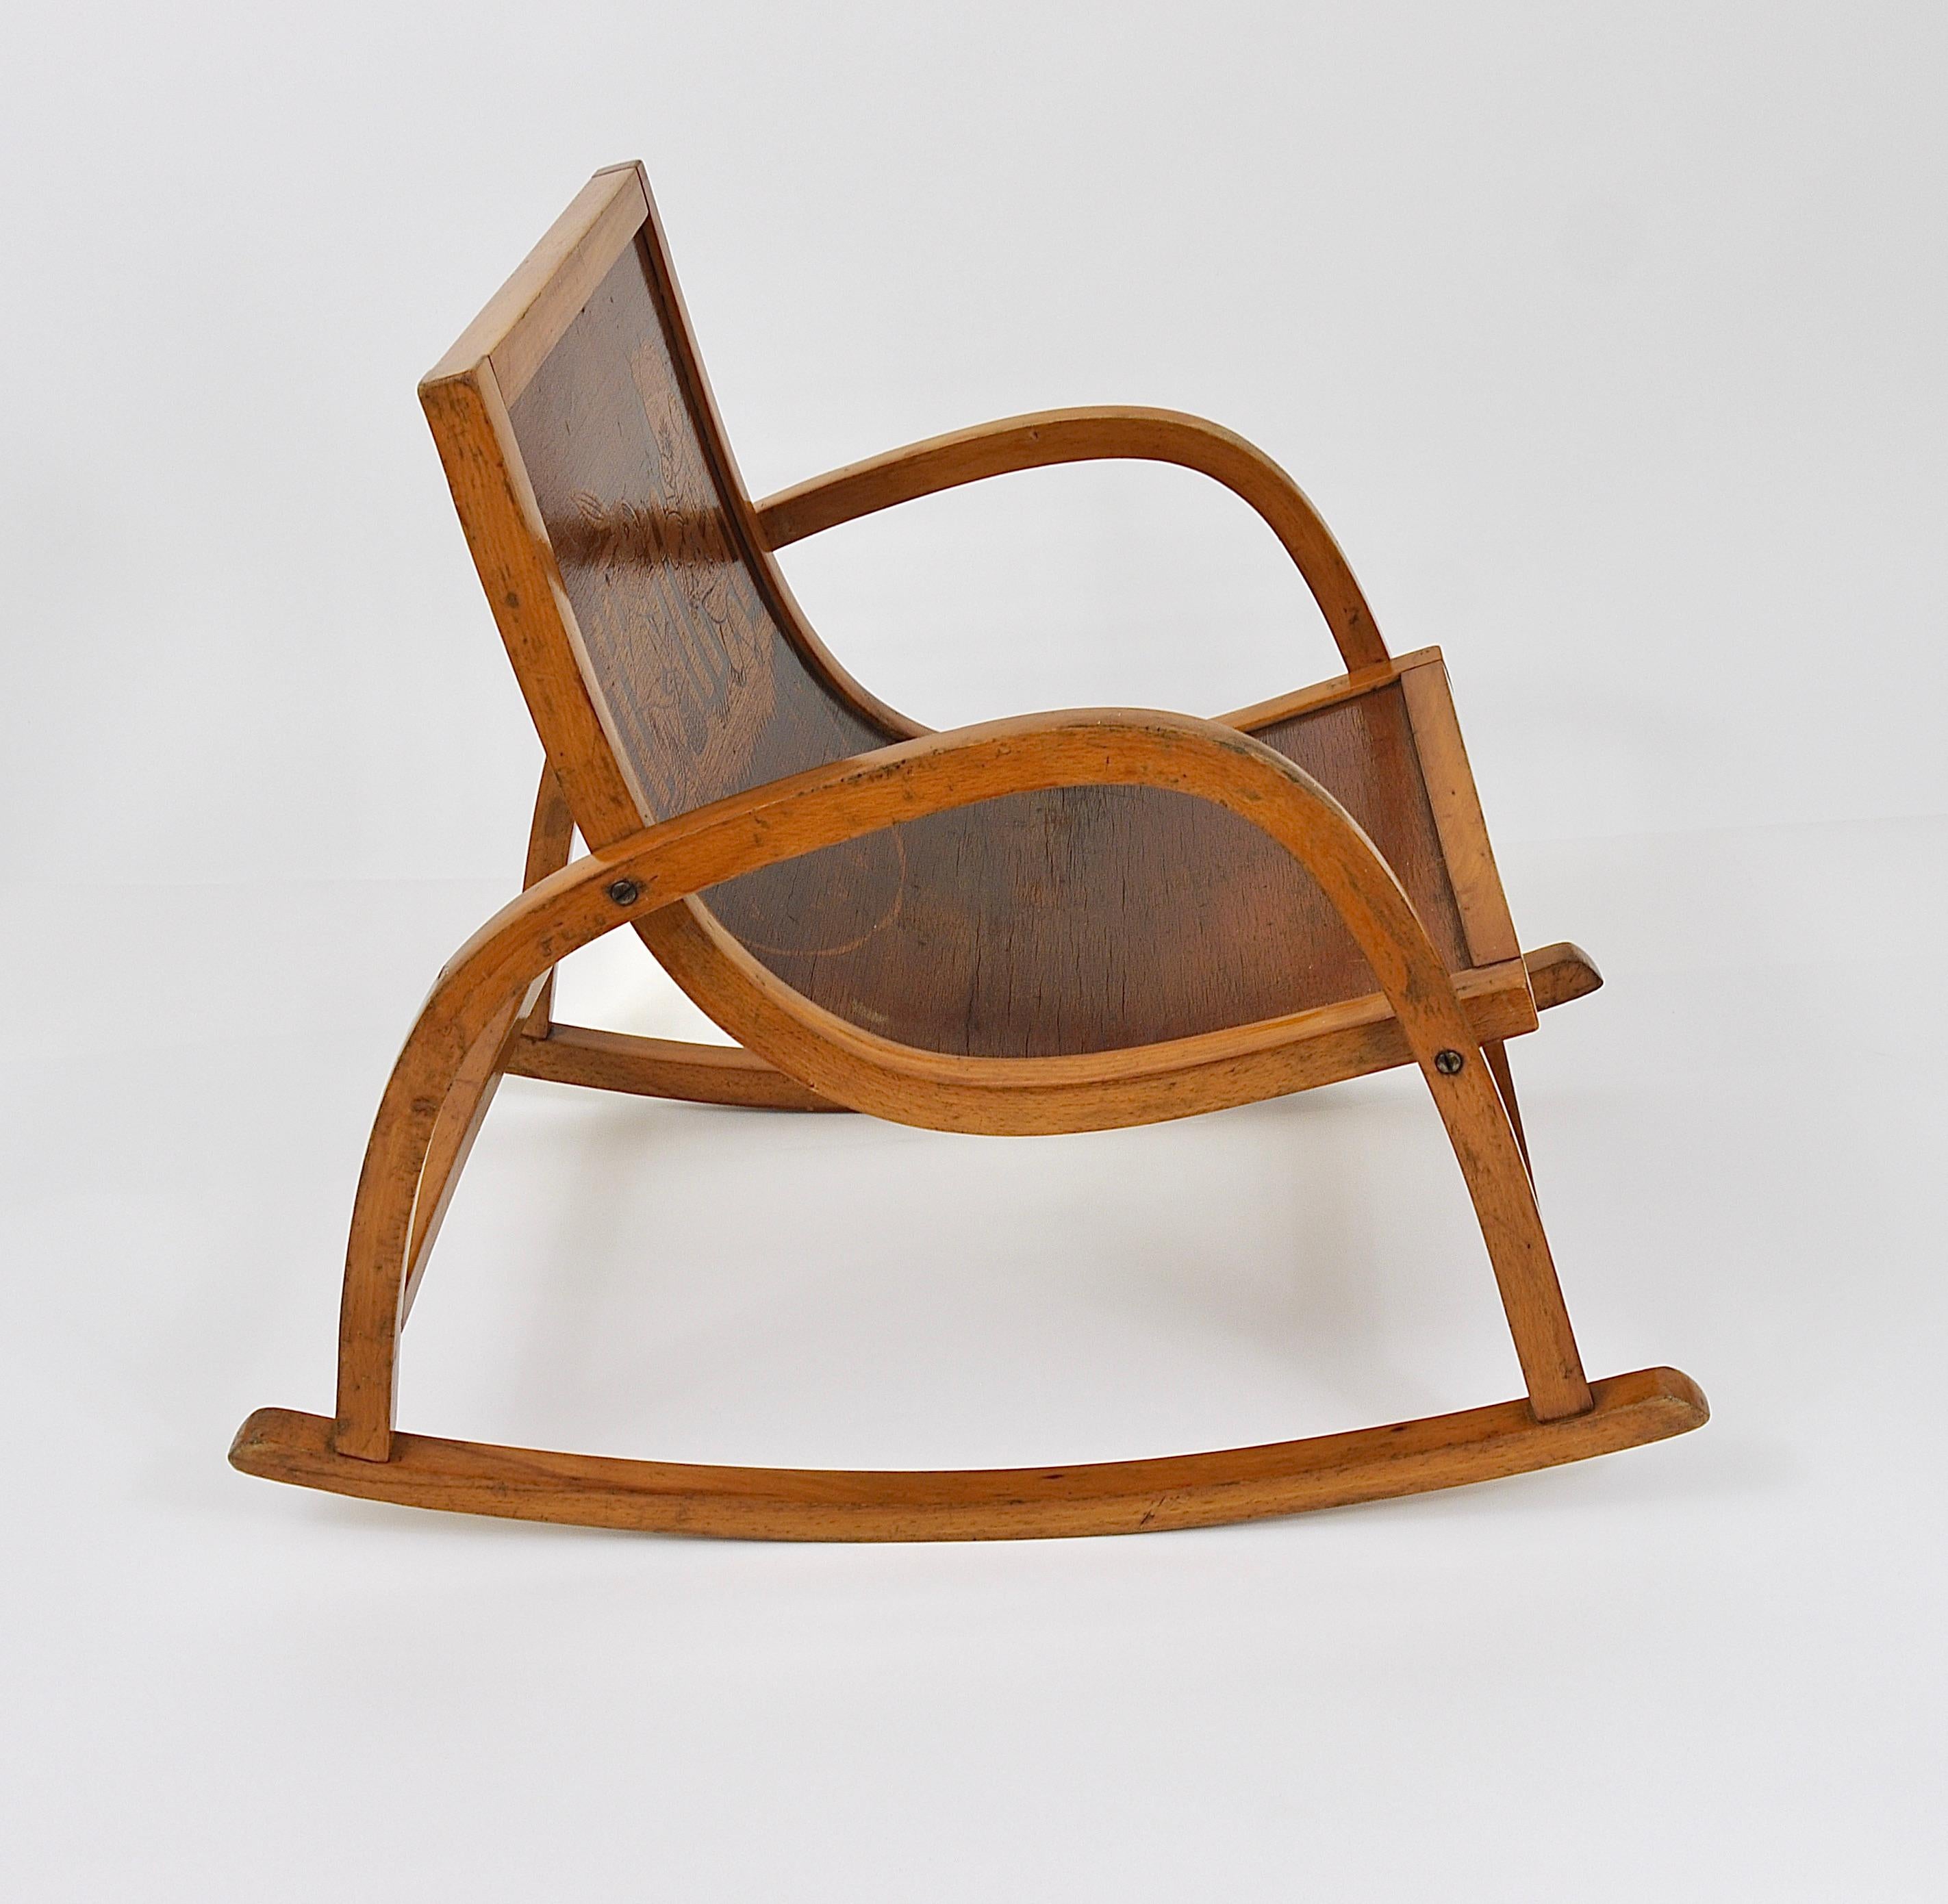 A beautiful and cute little Bauhaus rocking chair for children. Made in Germany in the 1950s, in the style of Hans Brockhage und Erwin Andrä. Made of bentwood with a charming fairy tale motif on its backrest. In very good condition with nice patina.